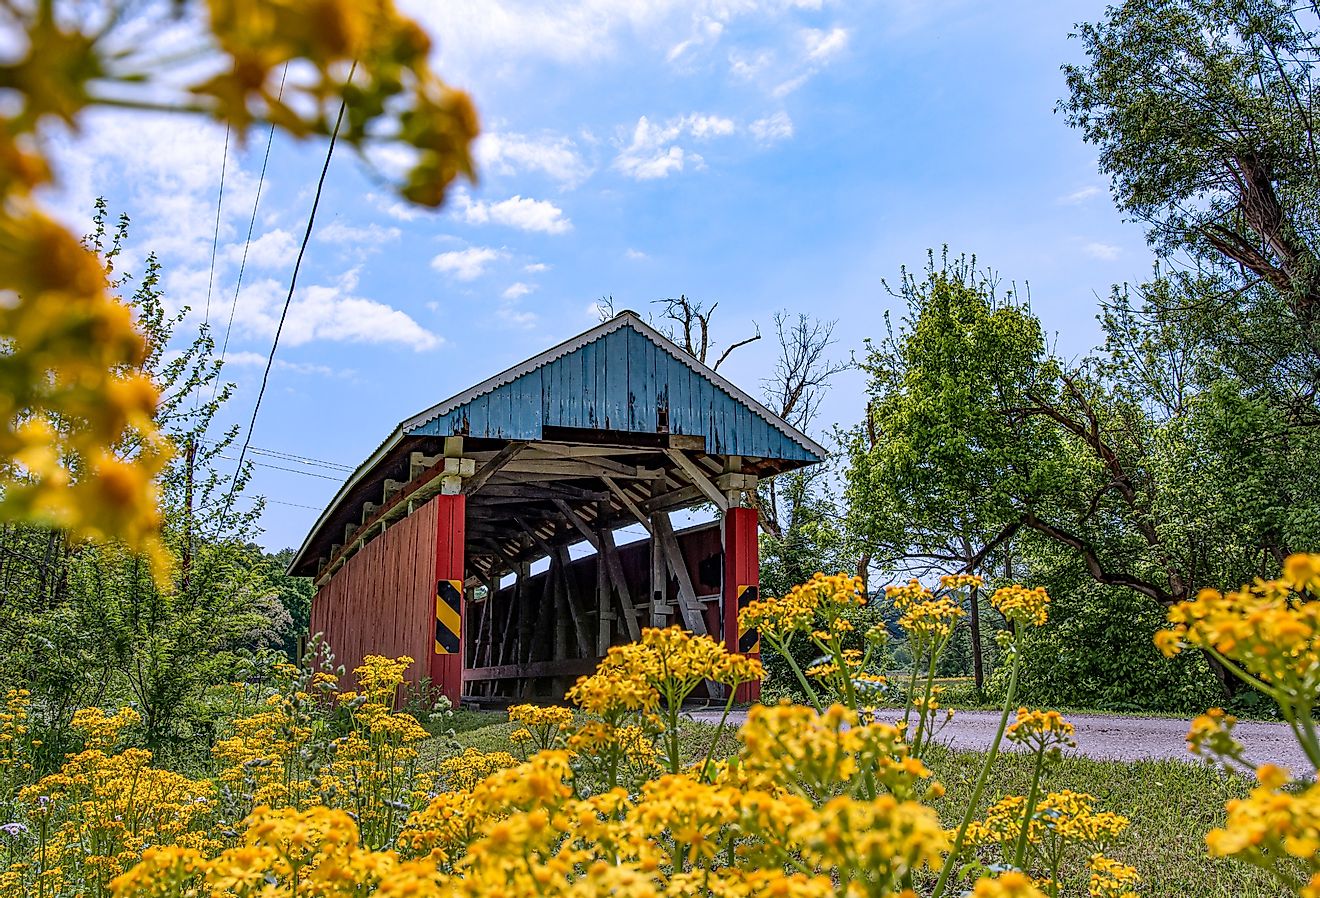 Gower Road Covered Bridge in Glenford, Ohio with wildflowers growing in spring. Image credit JNix via Shutterstock